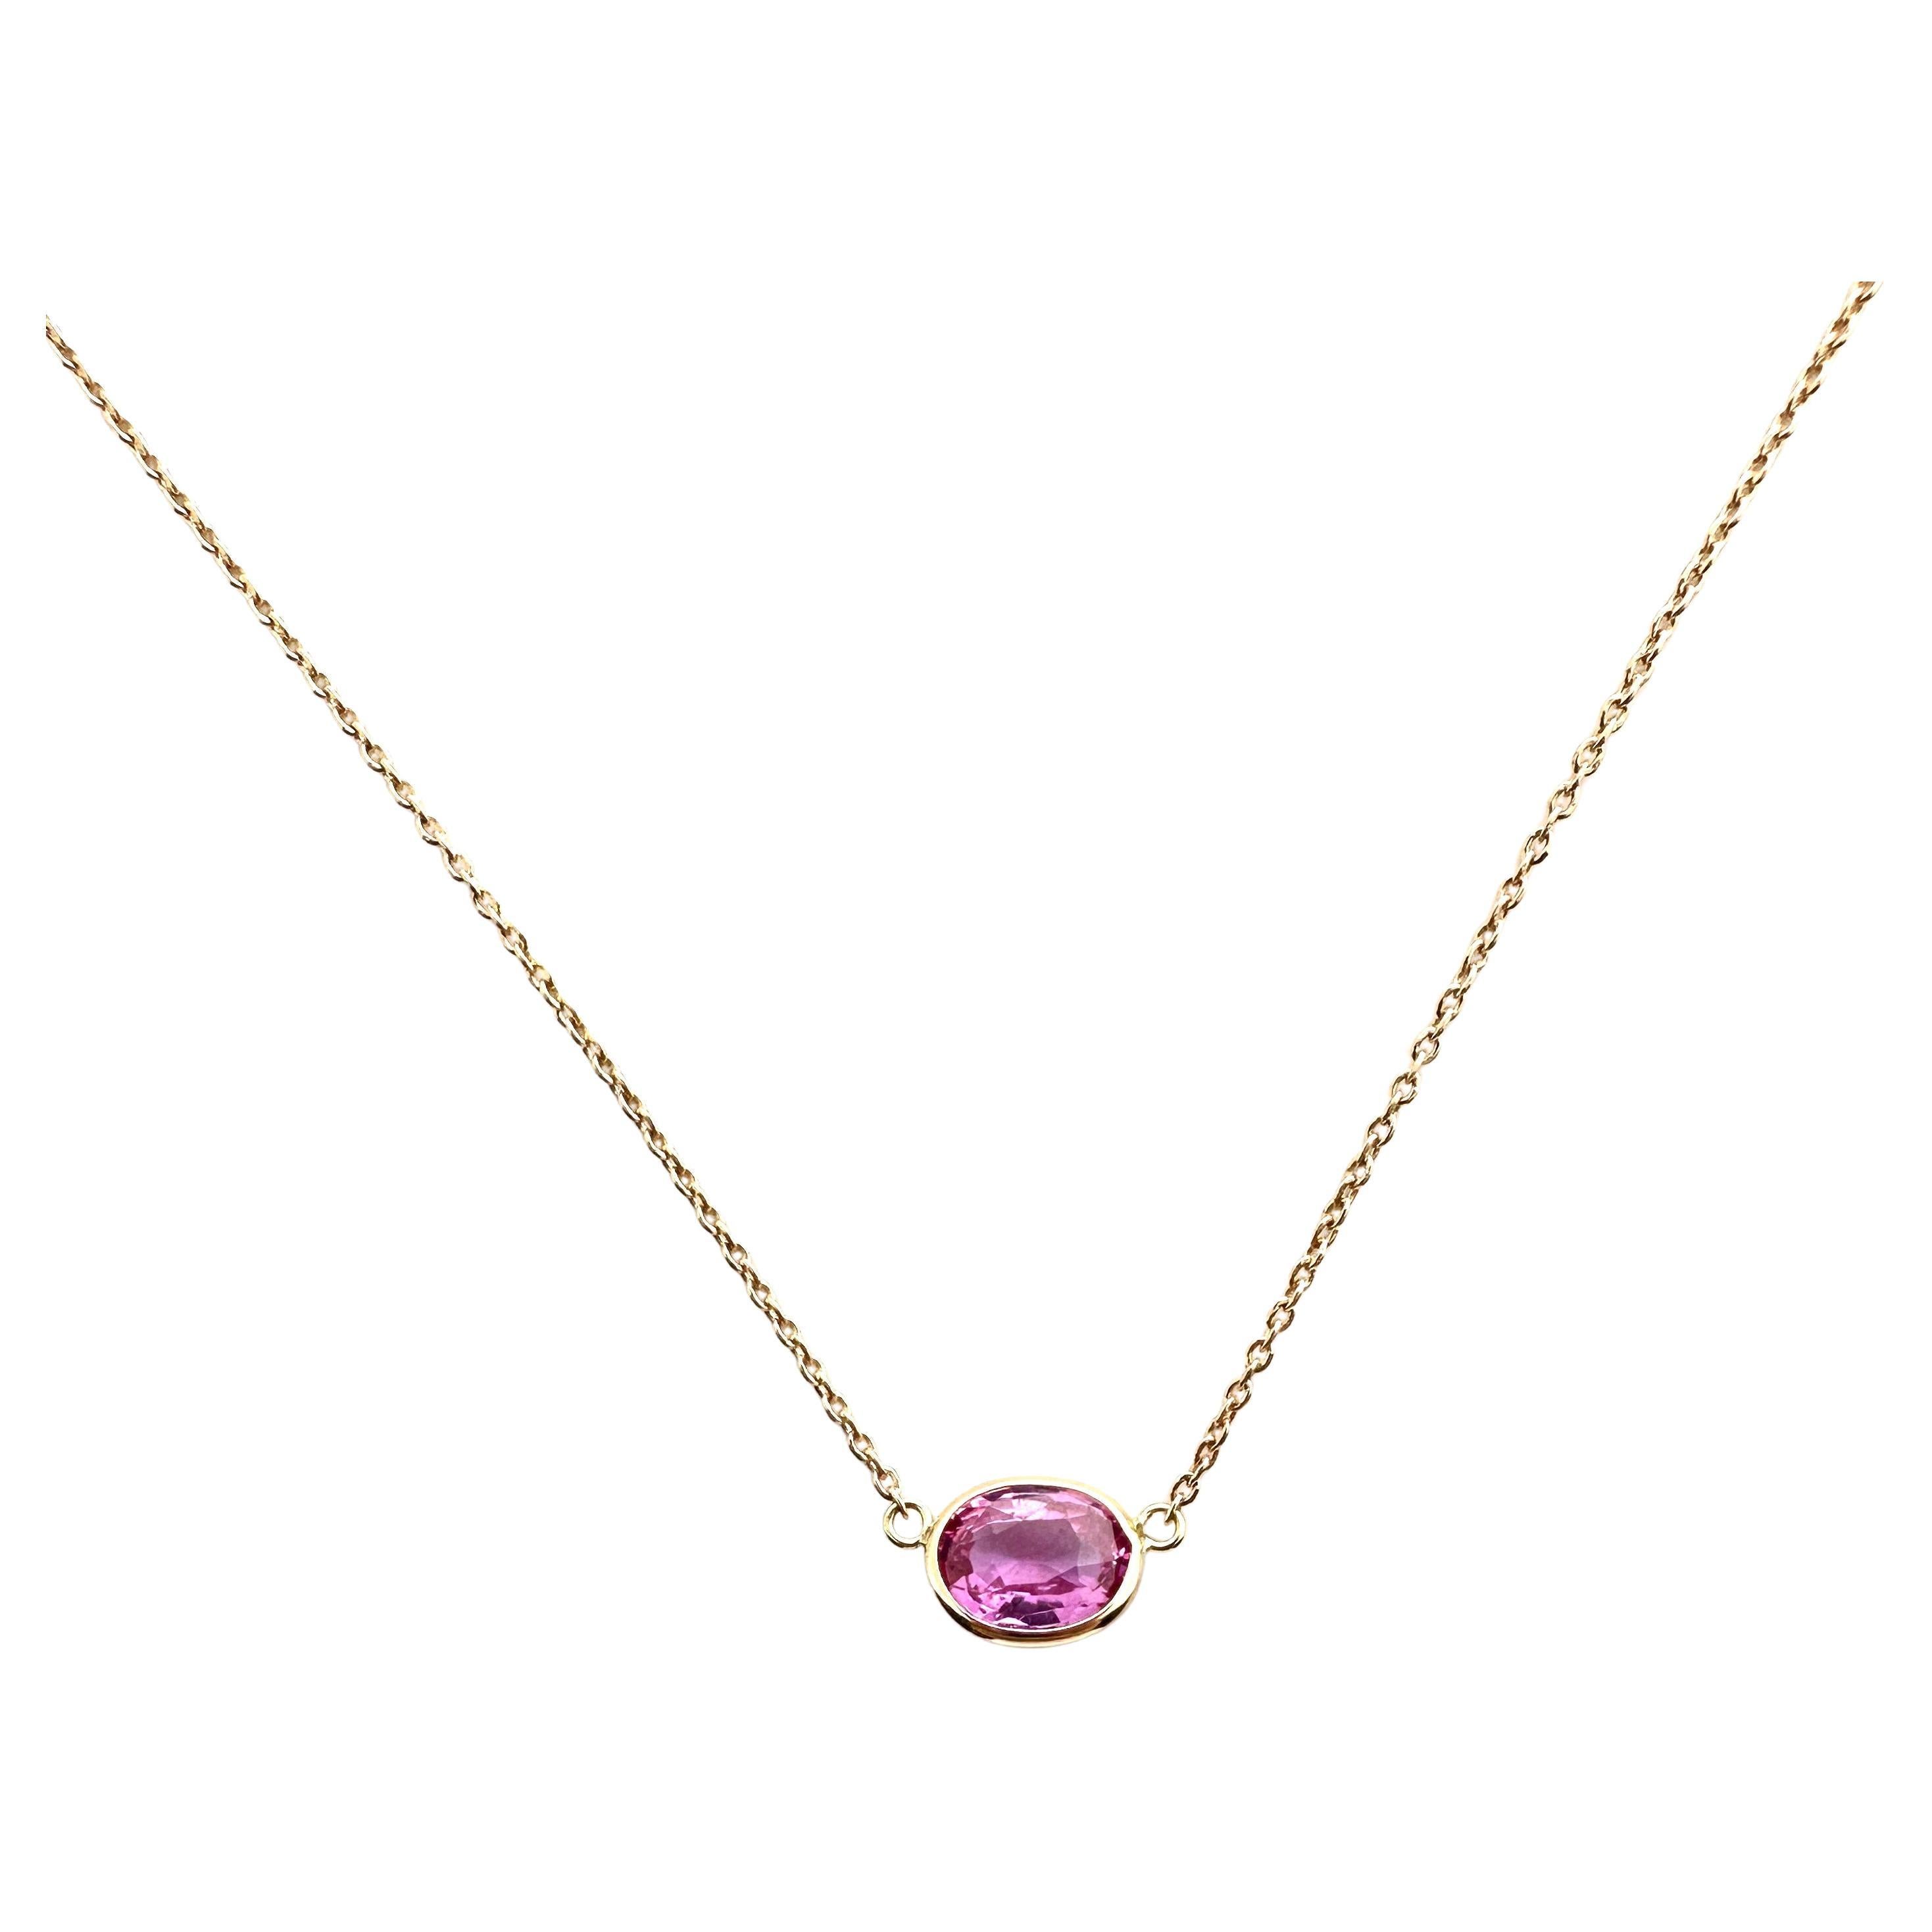 1.43 Carat Weight Pink Sapphire Oval Cut Solitaire Necklace in 14k Rose Gold